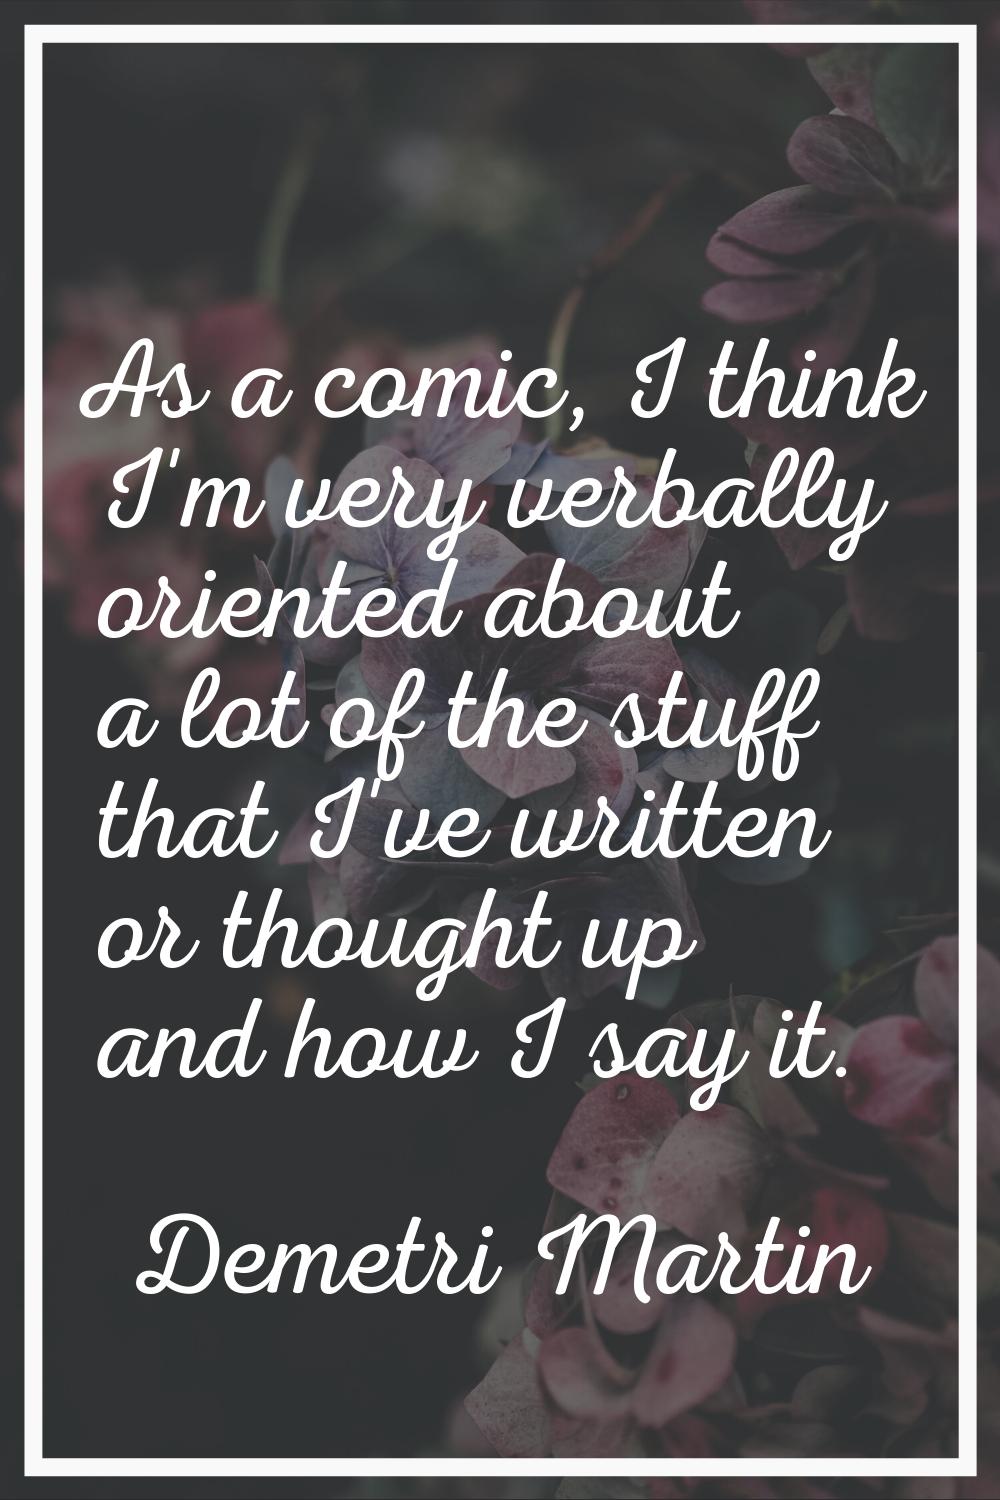 As a comic, I think I'm very verbally oriented about a lot of the stuff that I've written or though